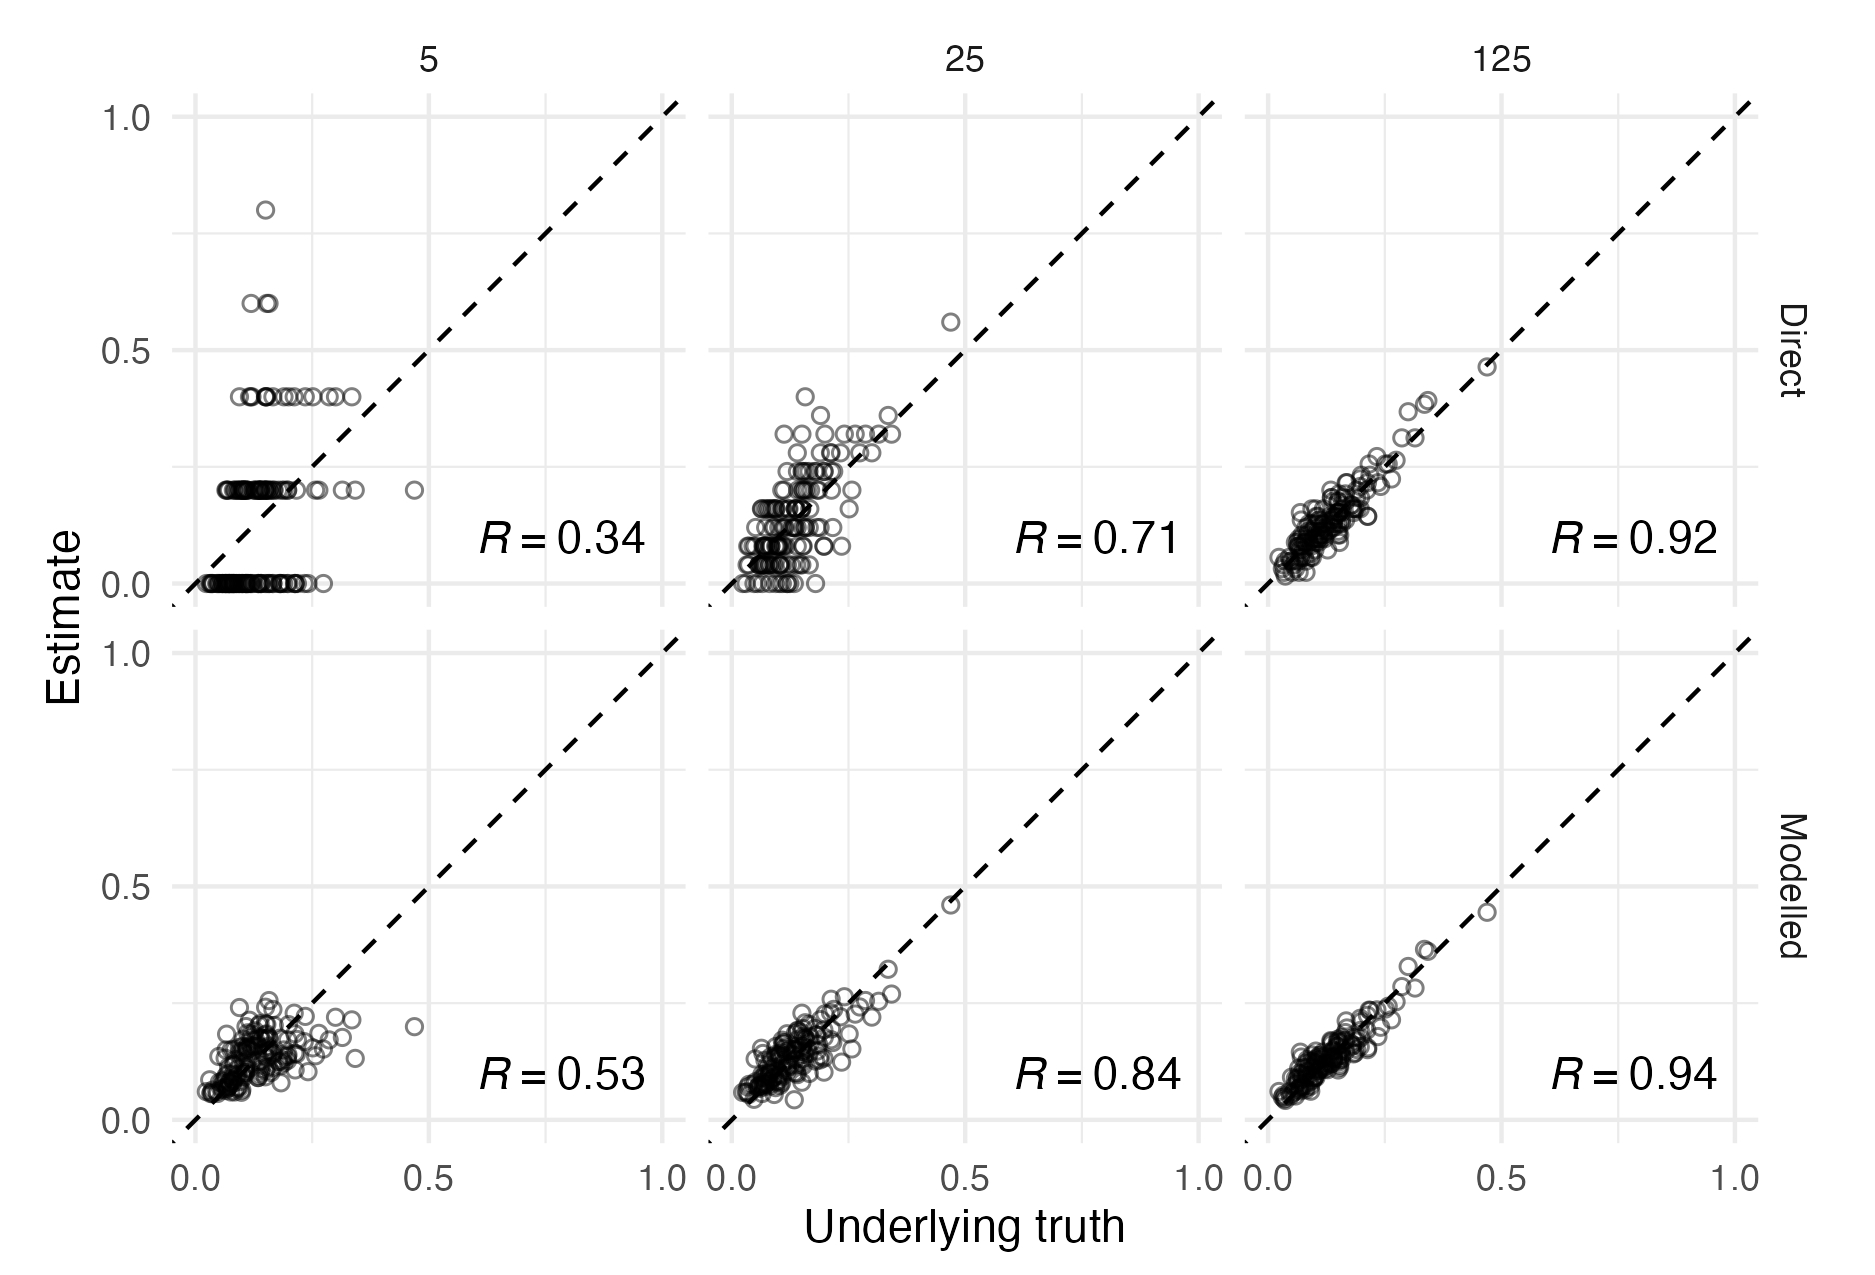 The setting of this figure matches that of Figure 3.4. Estimates from surveys with higher sample size have higher sample Pearson correlation coefficient \(R\) with the underlying truth, illustrating the benefit of collecting more data. For a fixed sample size however, correlation can be improved by using modelled estimates to borrow information across spatial units, rather than using the higher variance direct estimates. Points along the dashed diagonal line correspond to agreement between the estimate obtained from the survey and the underlying truth used to generate the data. For each sample size, using a spatial model increases the correlation between the estimates and underlying truth. The effect is more pronounced for lower sample sizes.